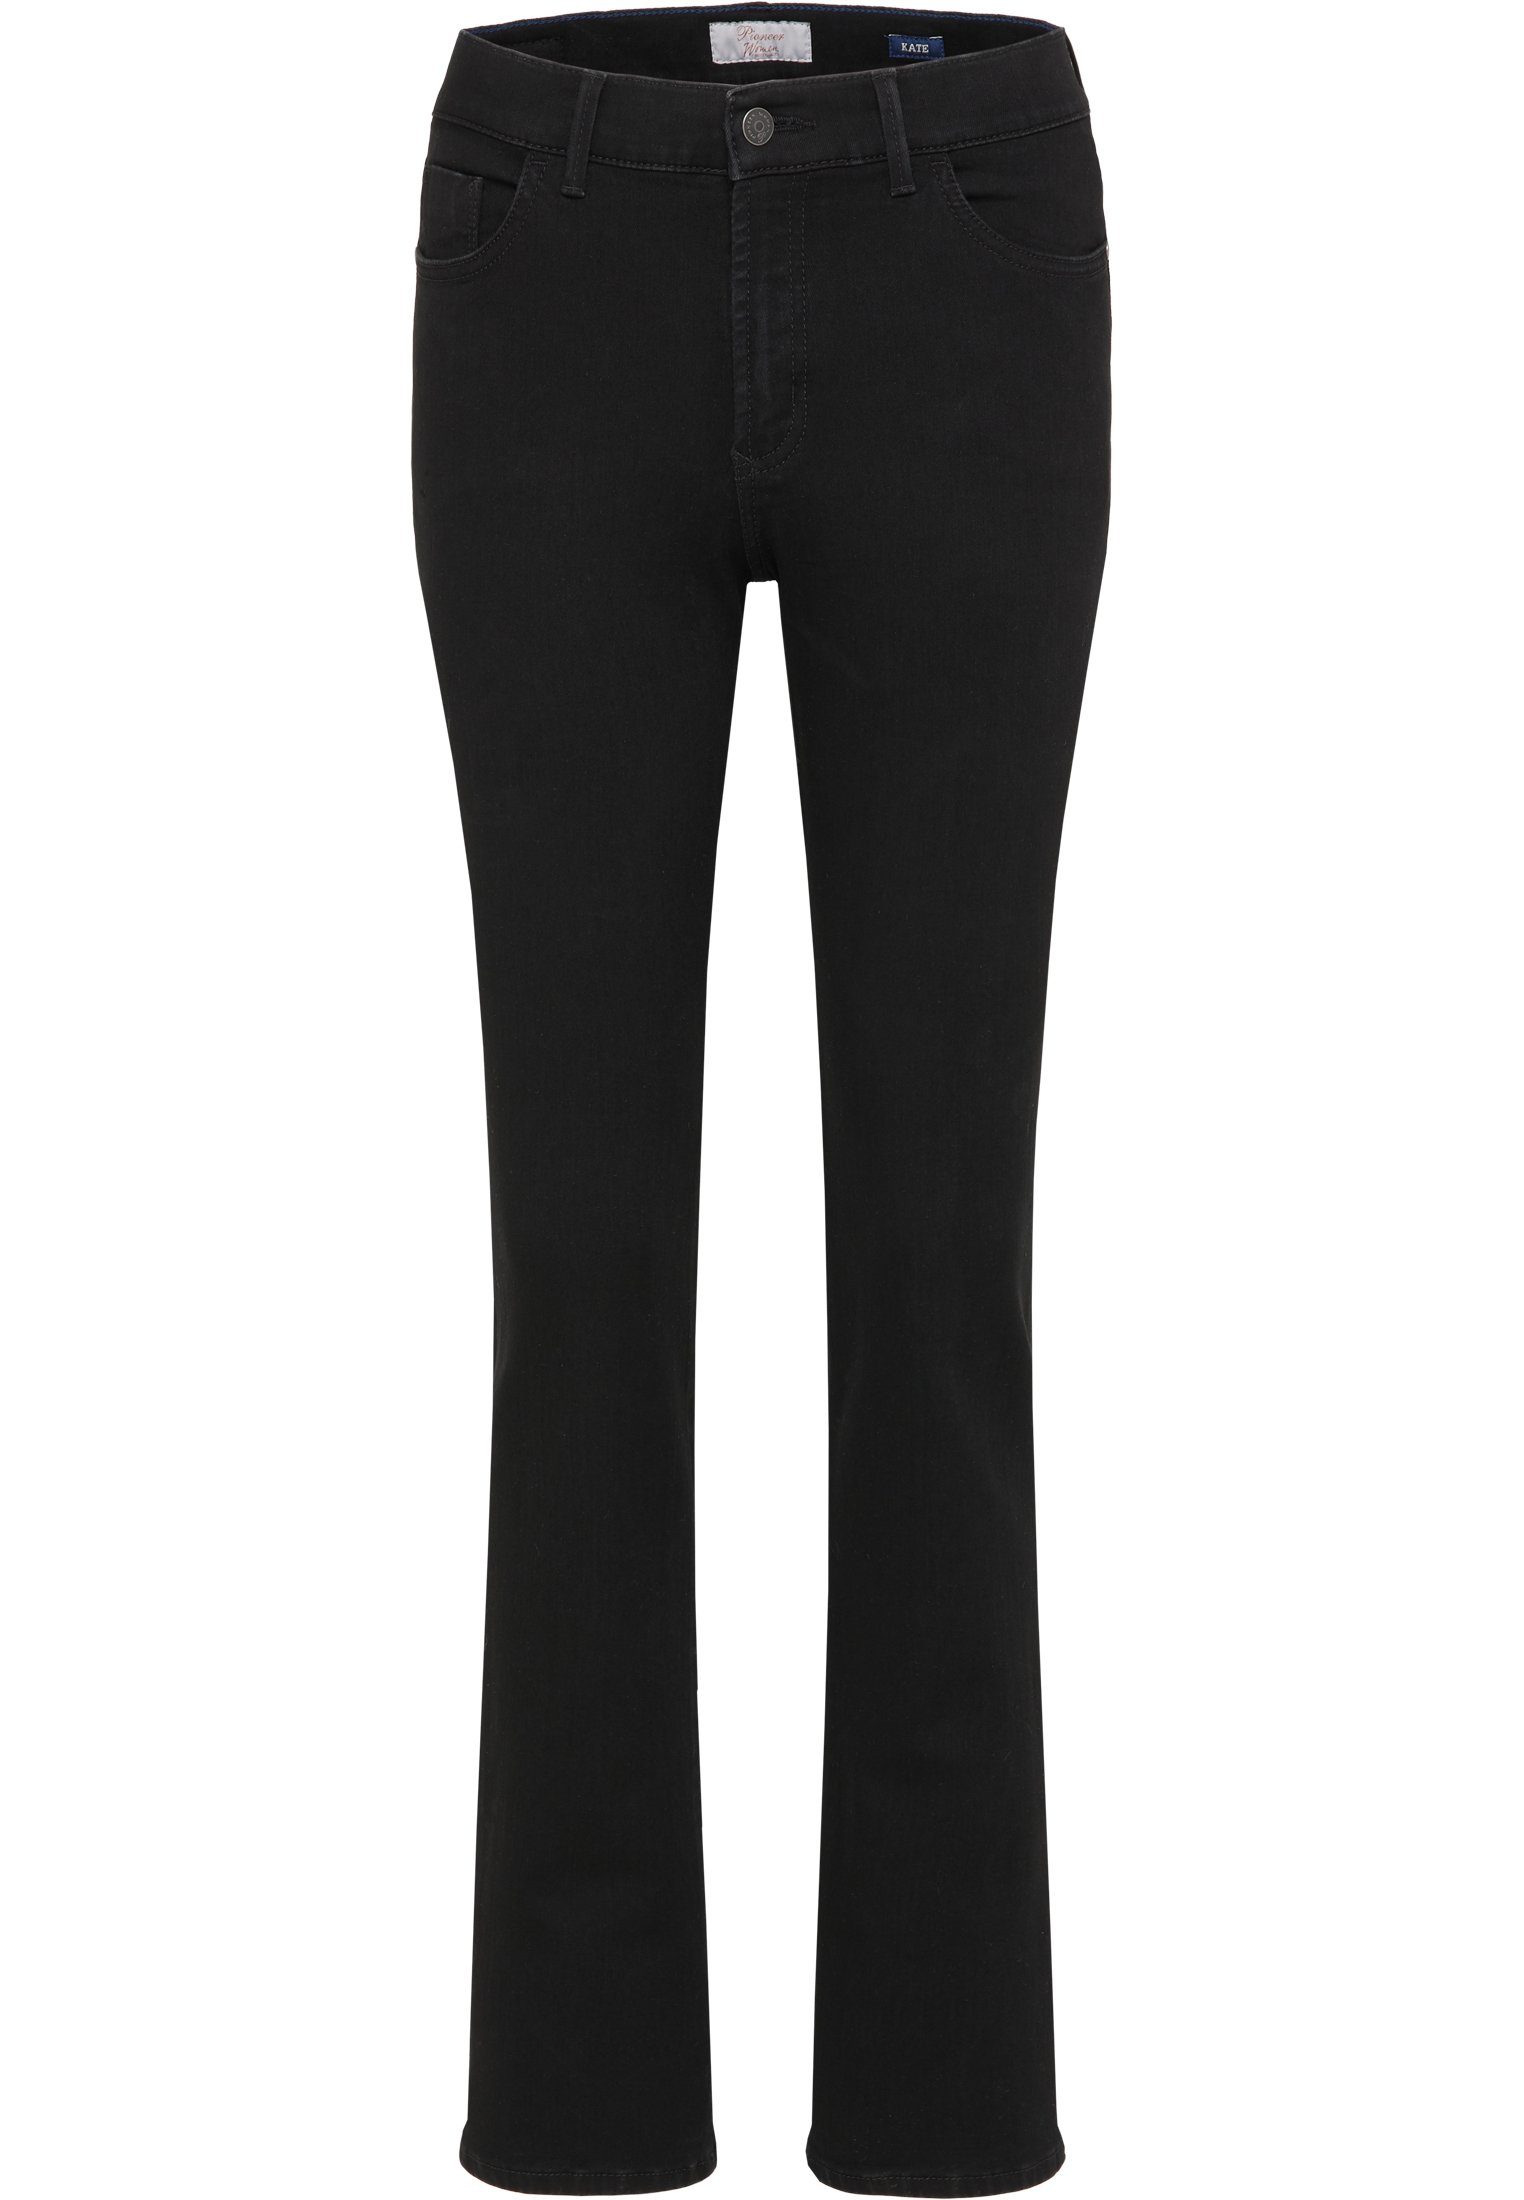 Pioneer Authentic Jeans Stretch-Jeans PIONEER KATE black 3213 4012.11 - POWERSTRETCH